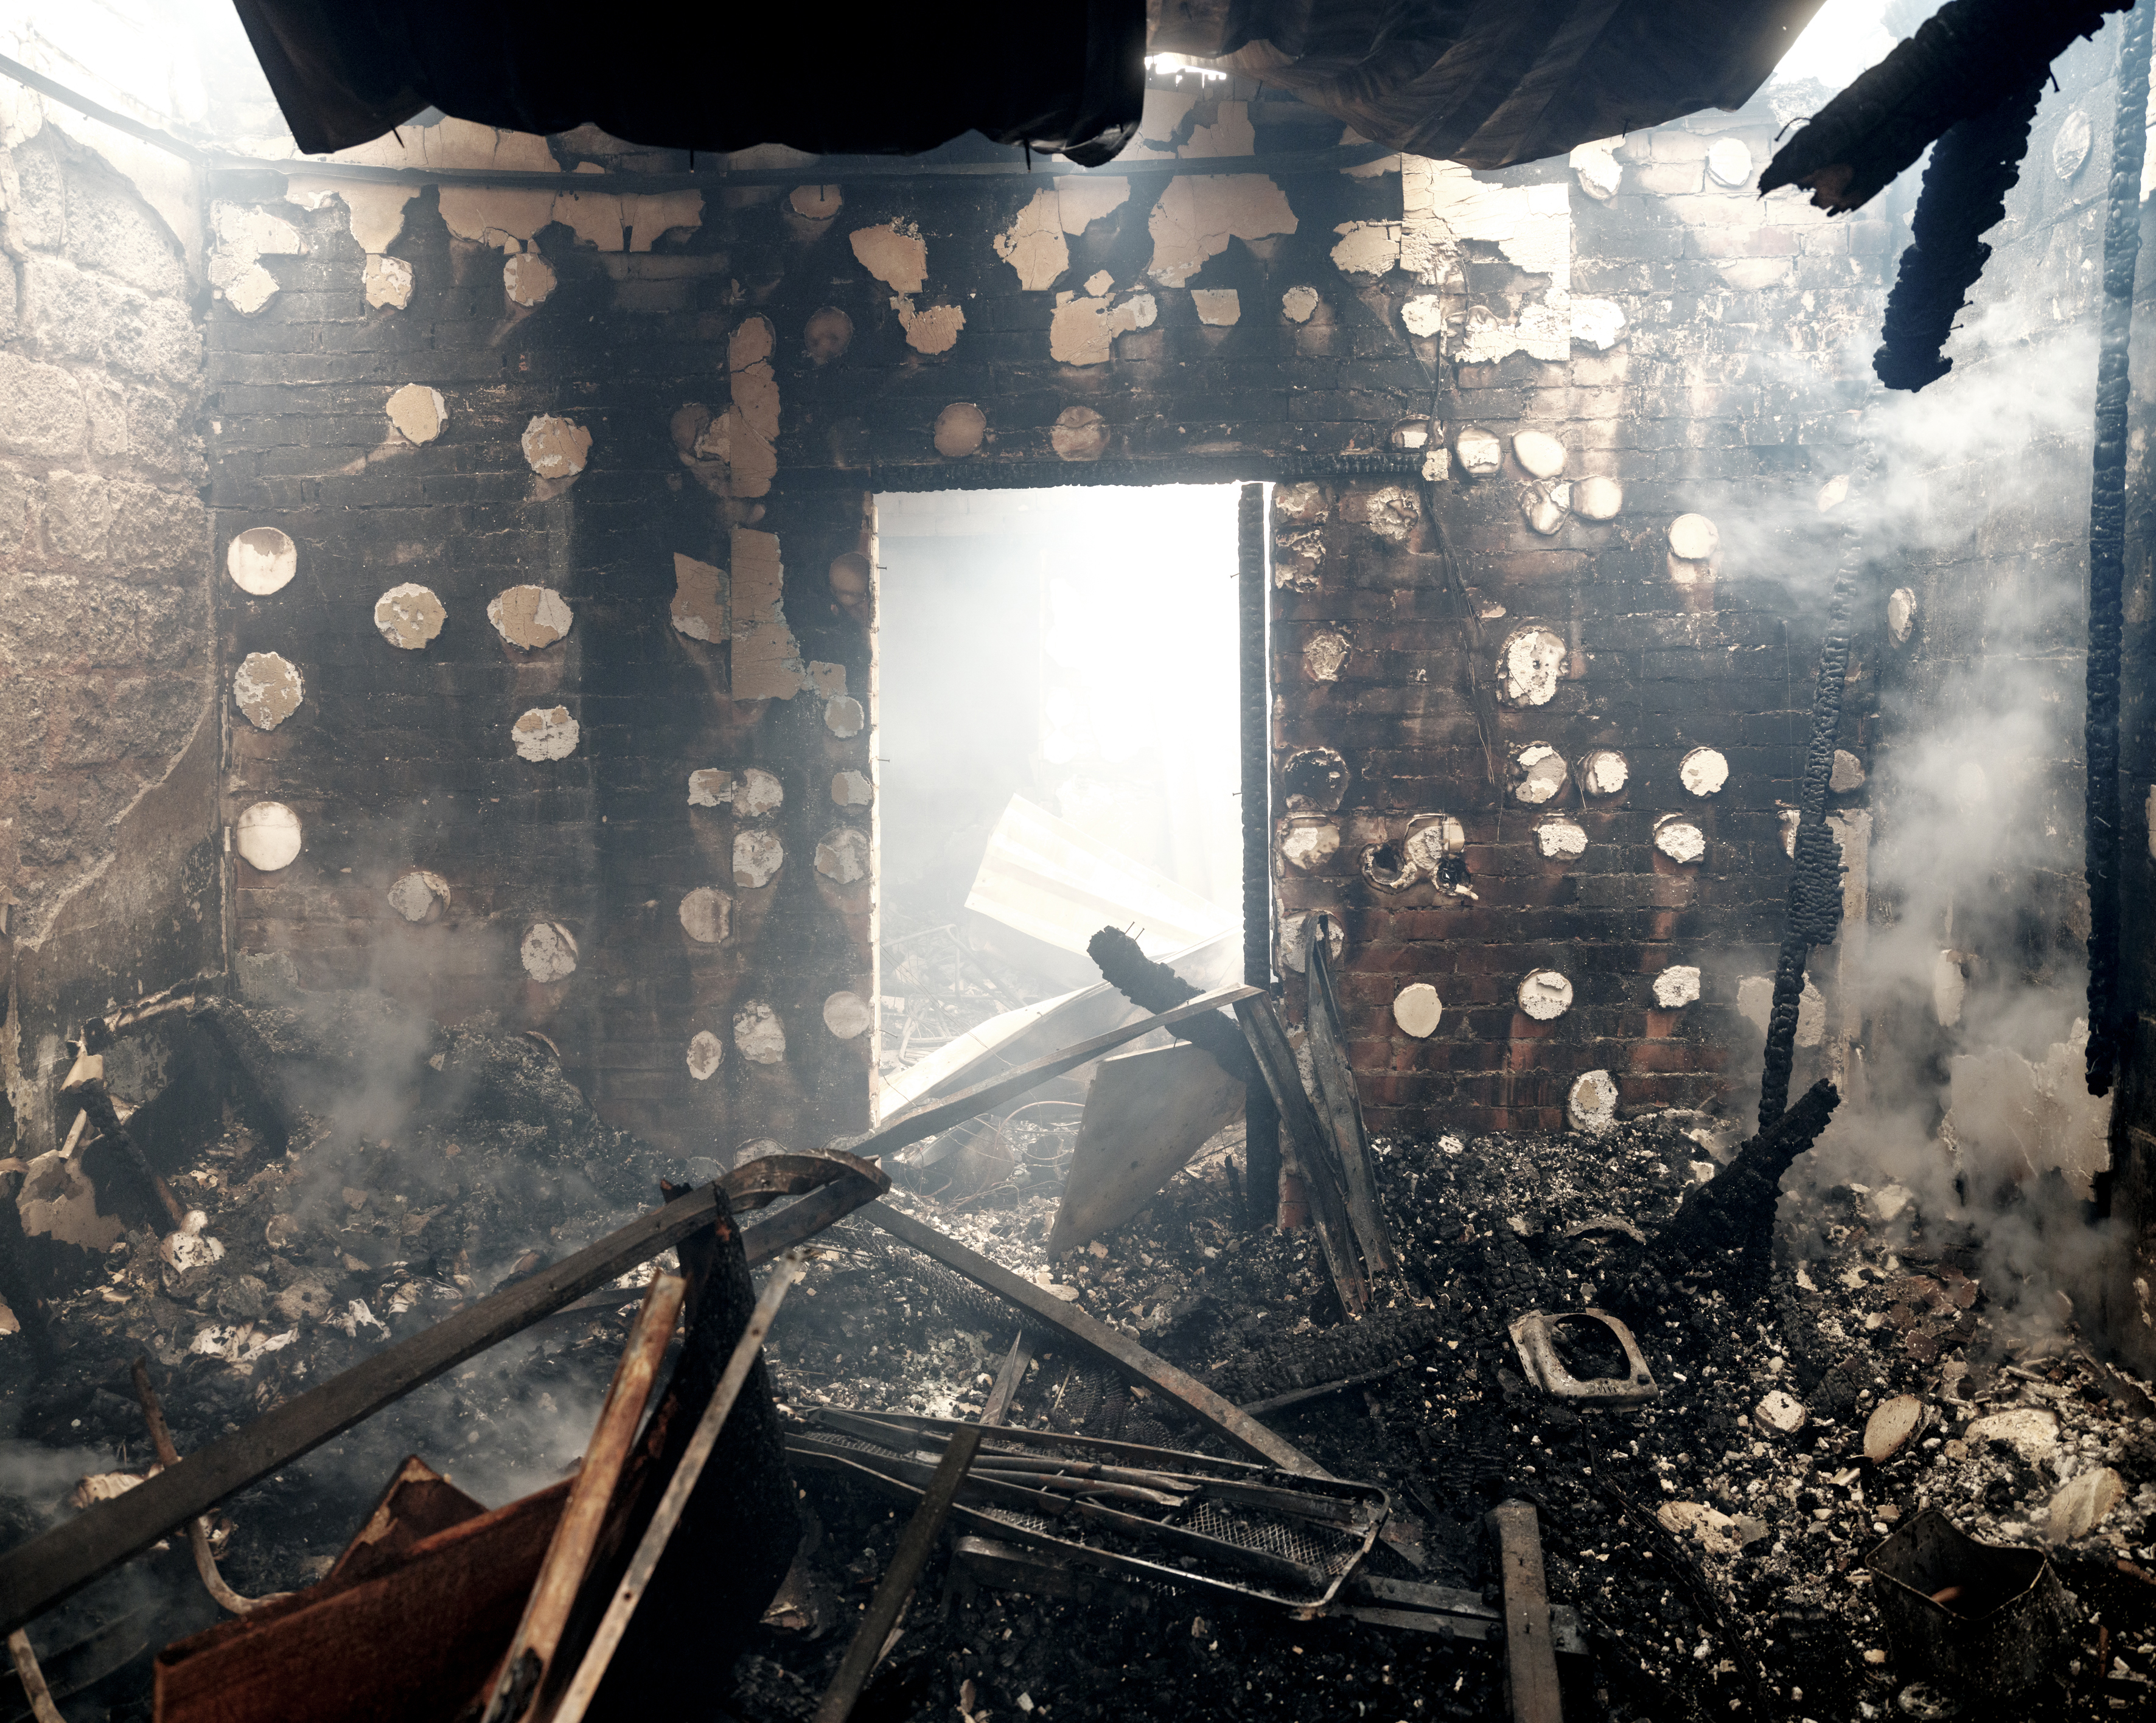 24 February 2022. Burning civilian houses hit by a rocket. MSF has been working in eastern Ukraine for the last eight years, trying to improve access to health care for remote, conflict-affected populations. 